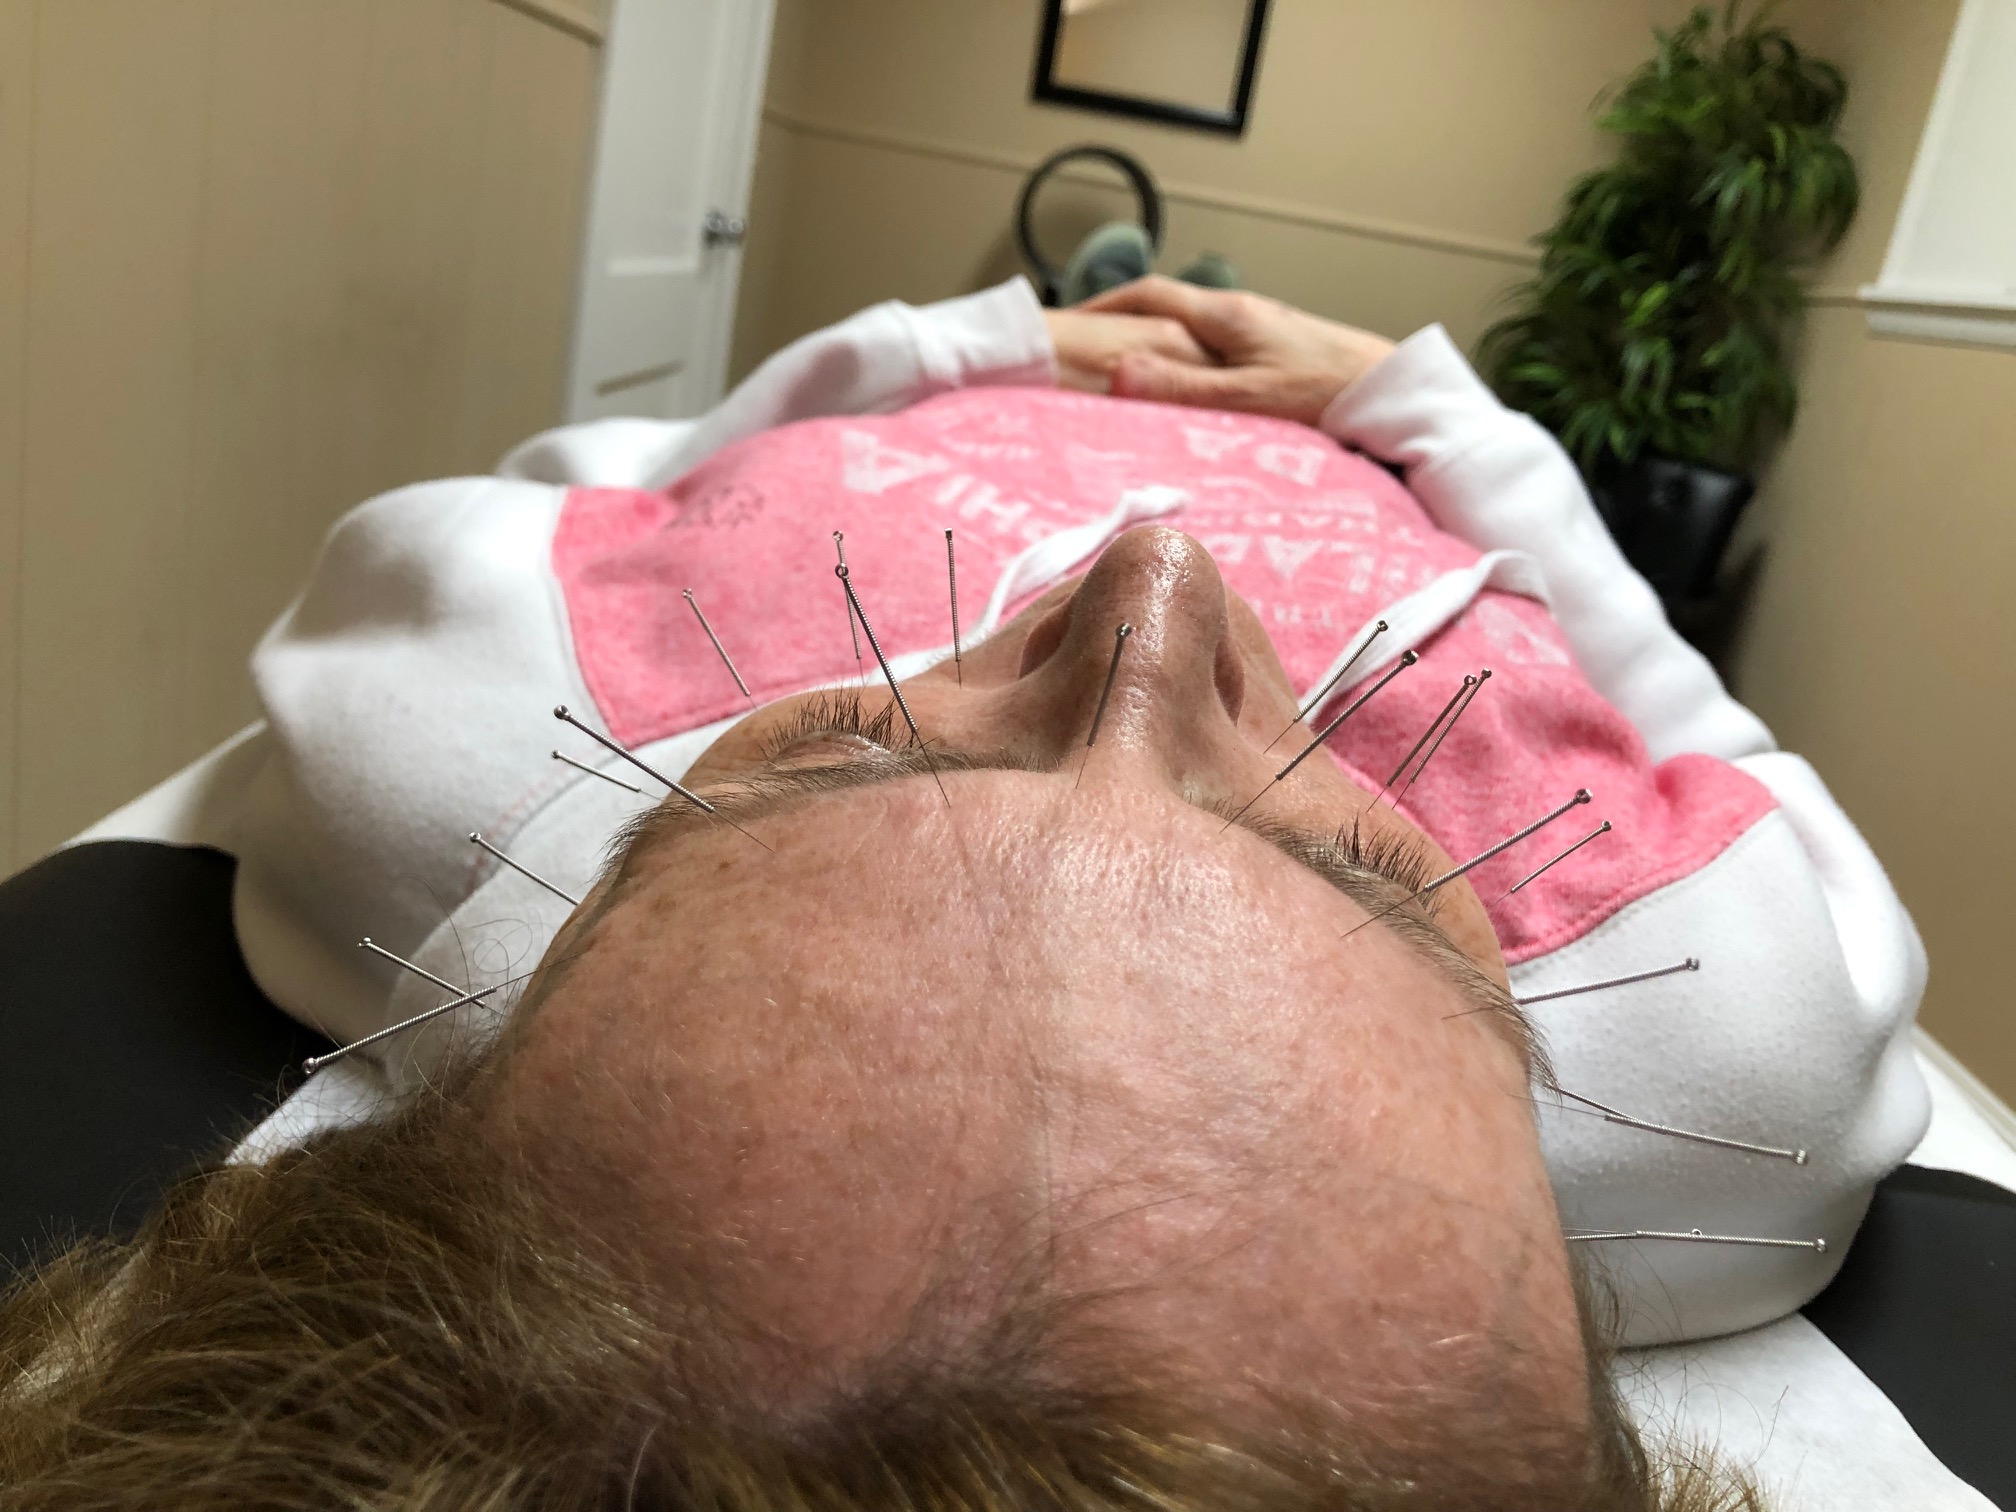 Dry Needling and Sinus Problems